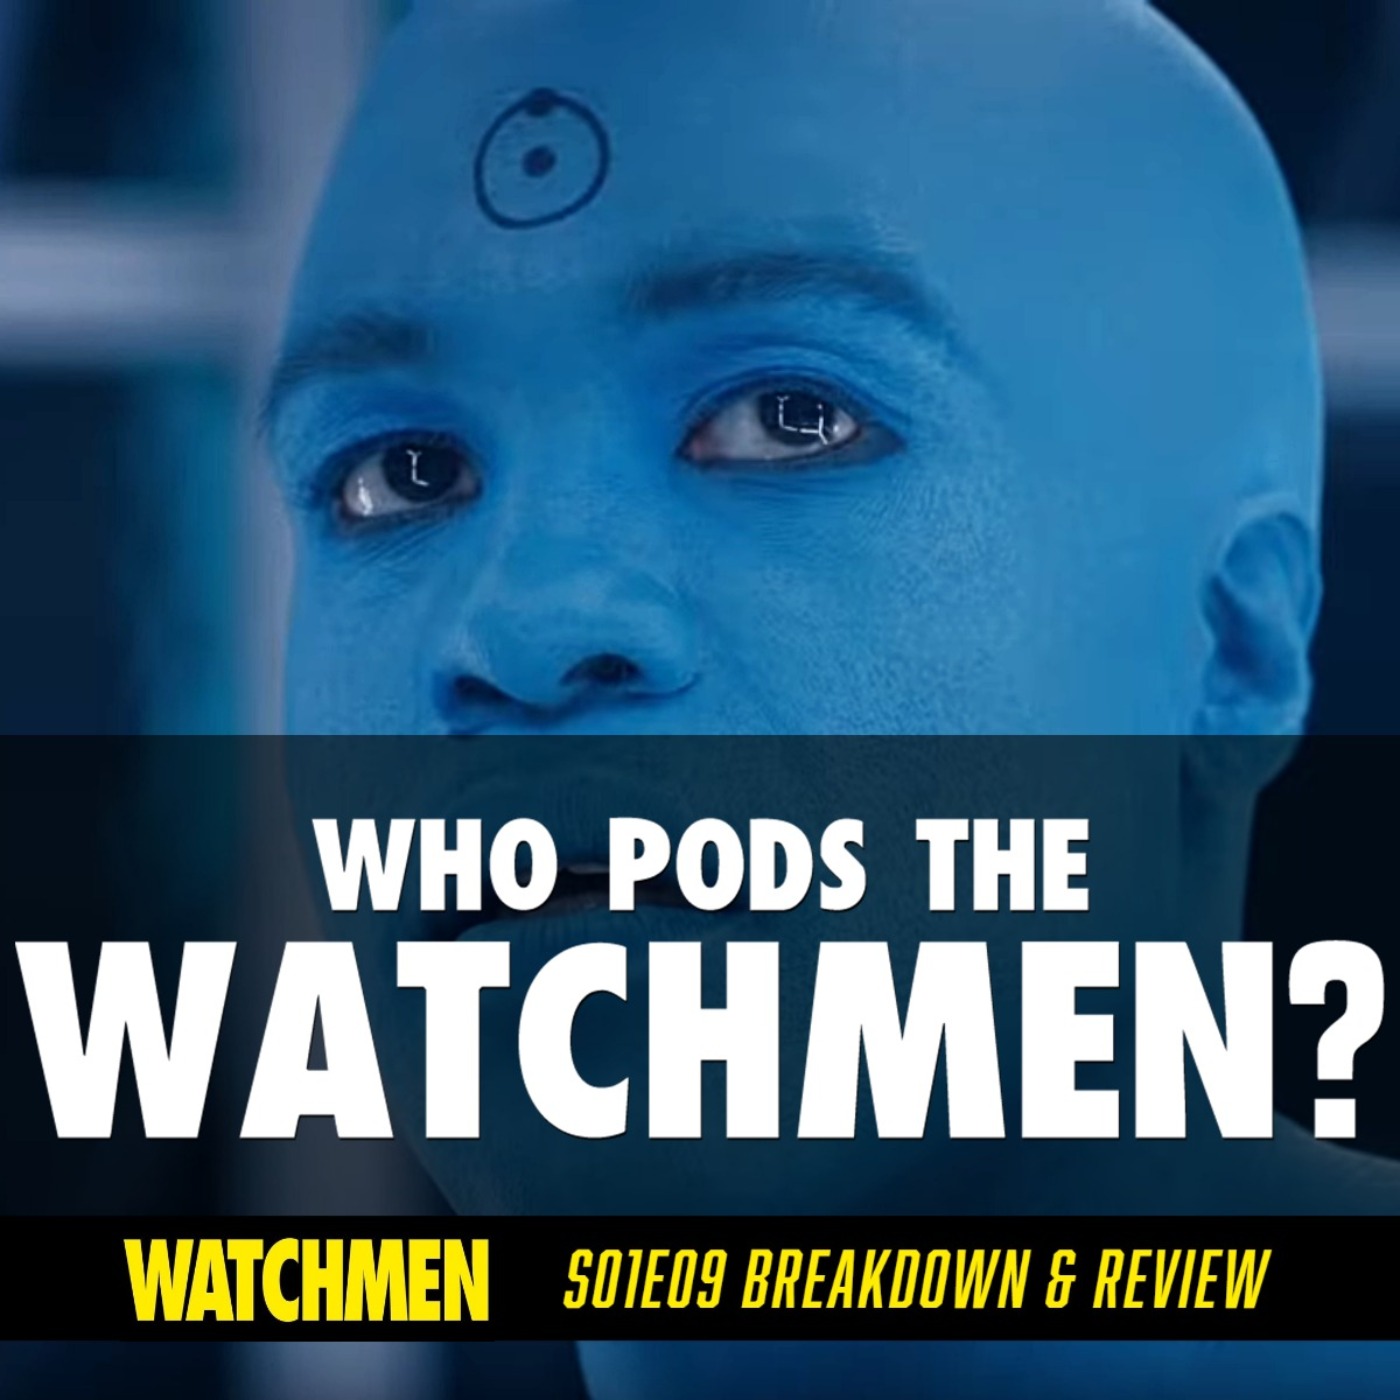 Watchmen Episode 09 "See How They Fly" Breakdown & Review (S01E09)